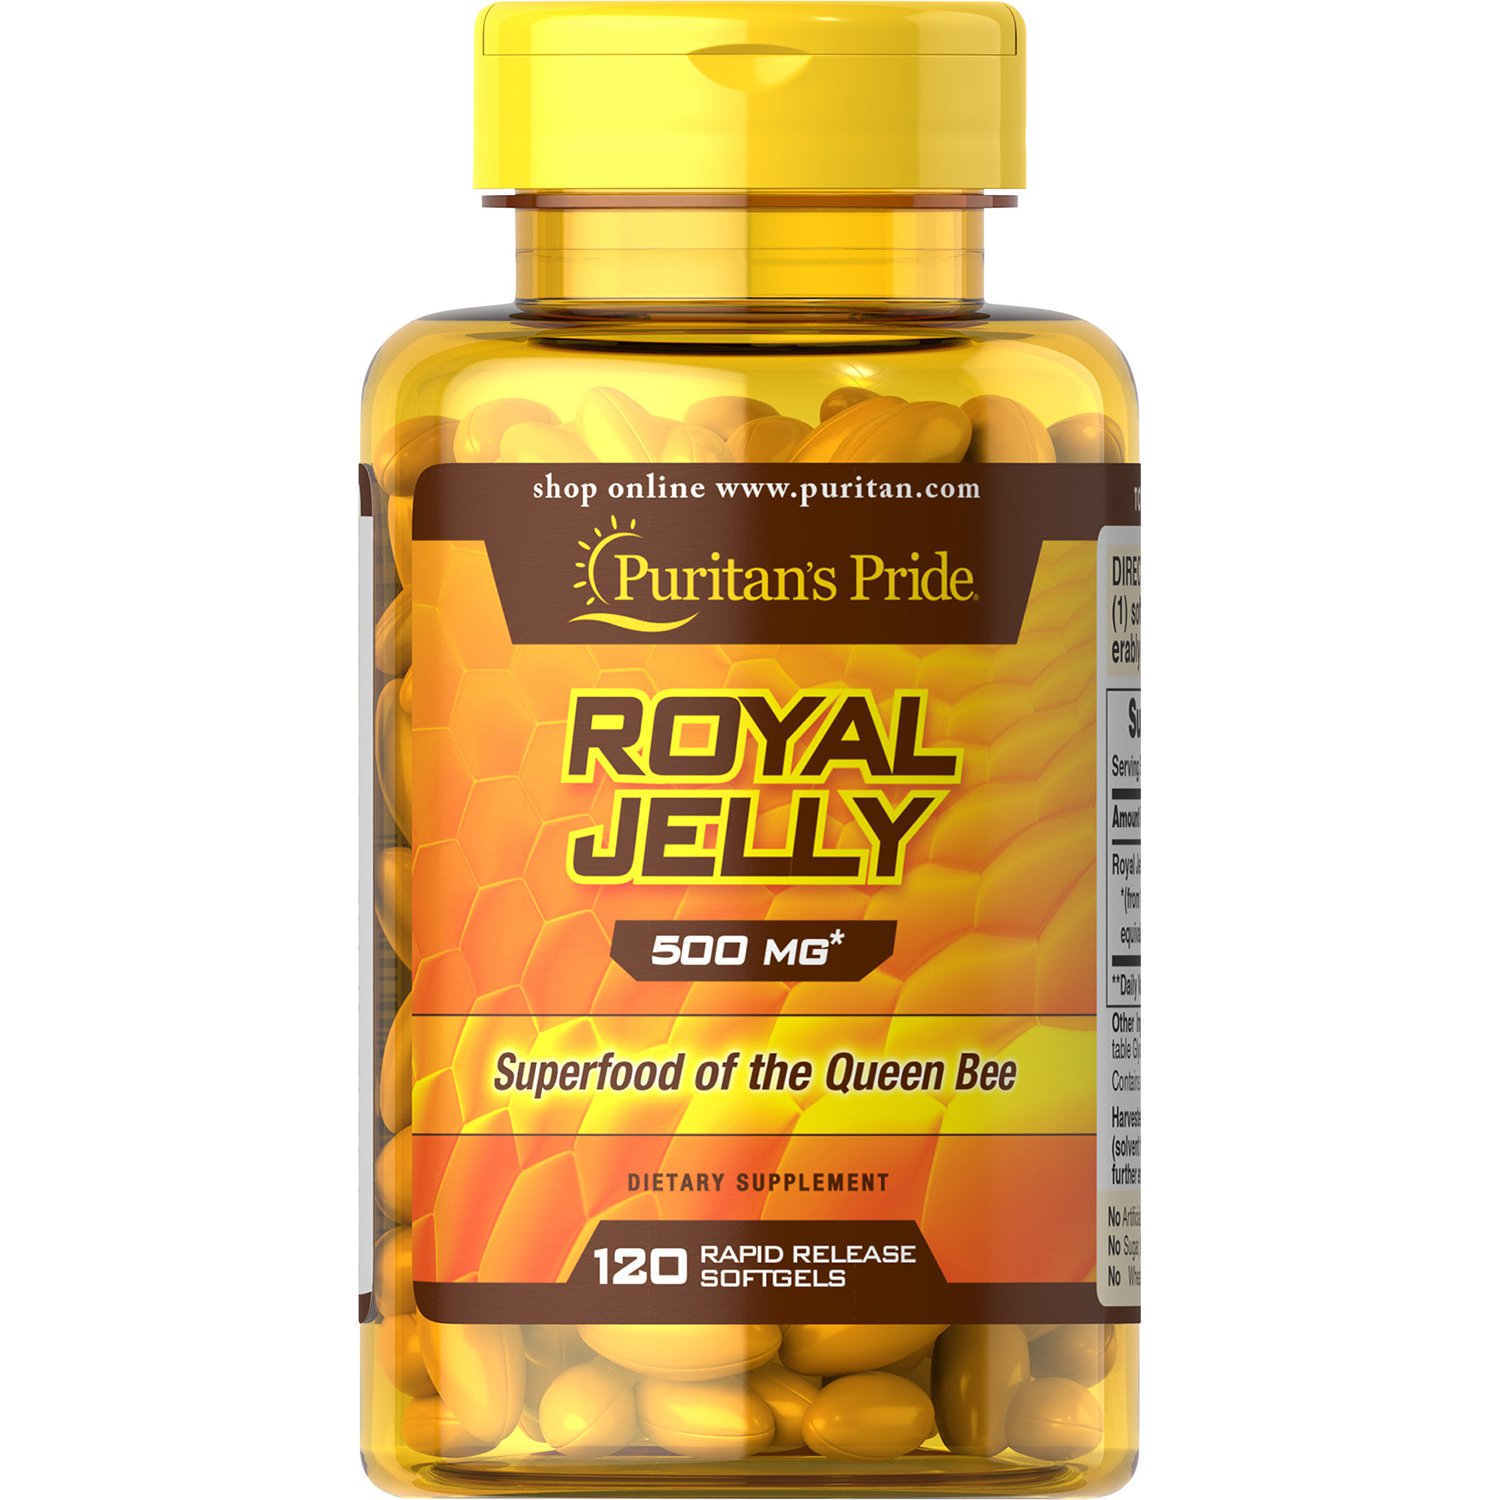 Puritans Pride Royal Jelly Softgels 500 mg, 120 Count